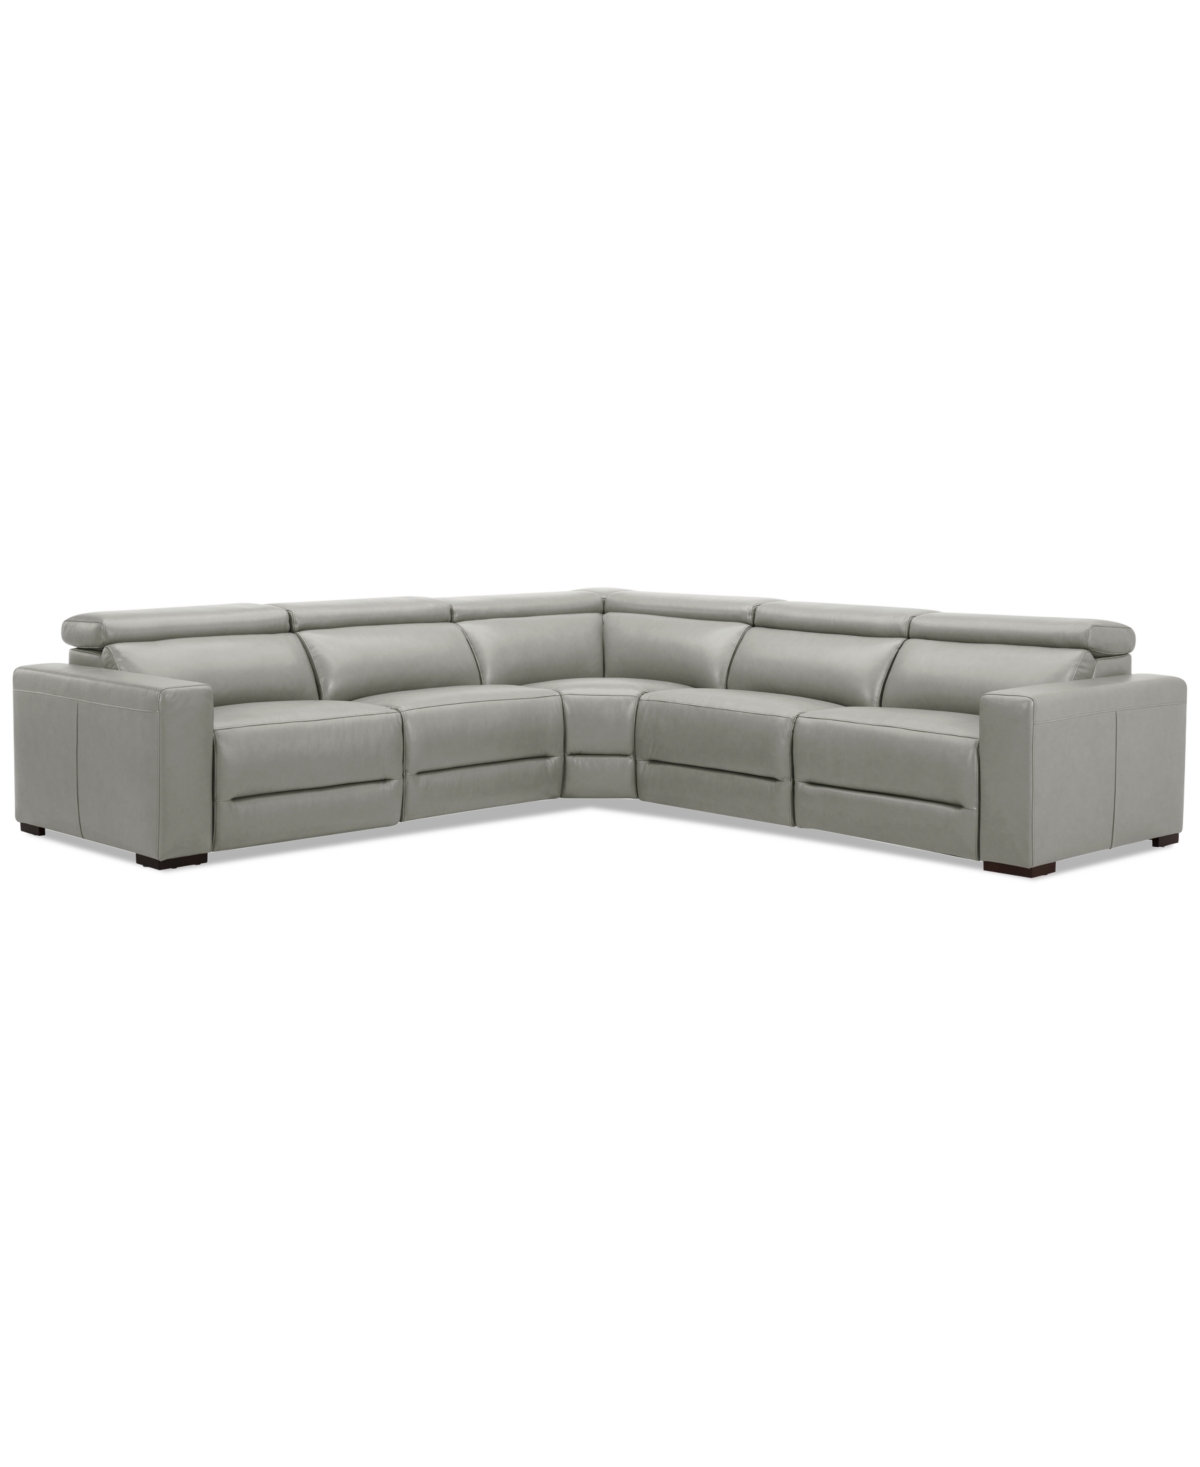 Macy's Nevio 124" 5-pc. Leather Sectional With 2 Power Recliners And Headrests, Created For  In Light Grey